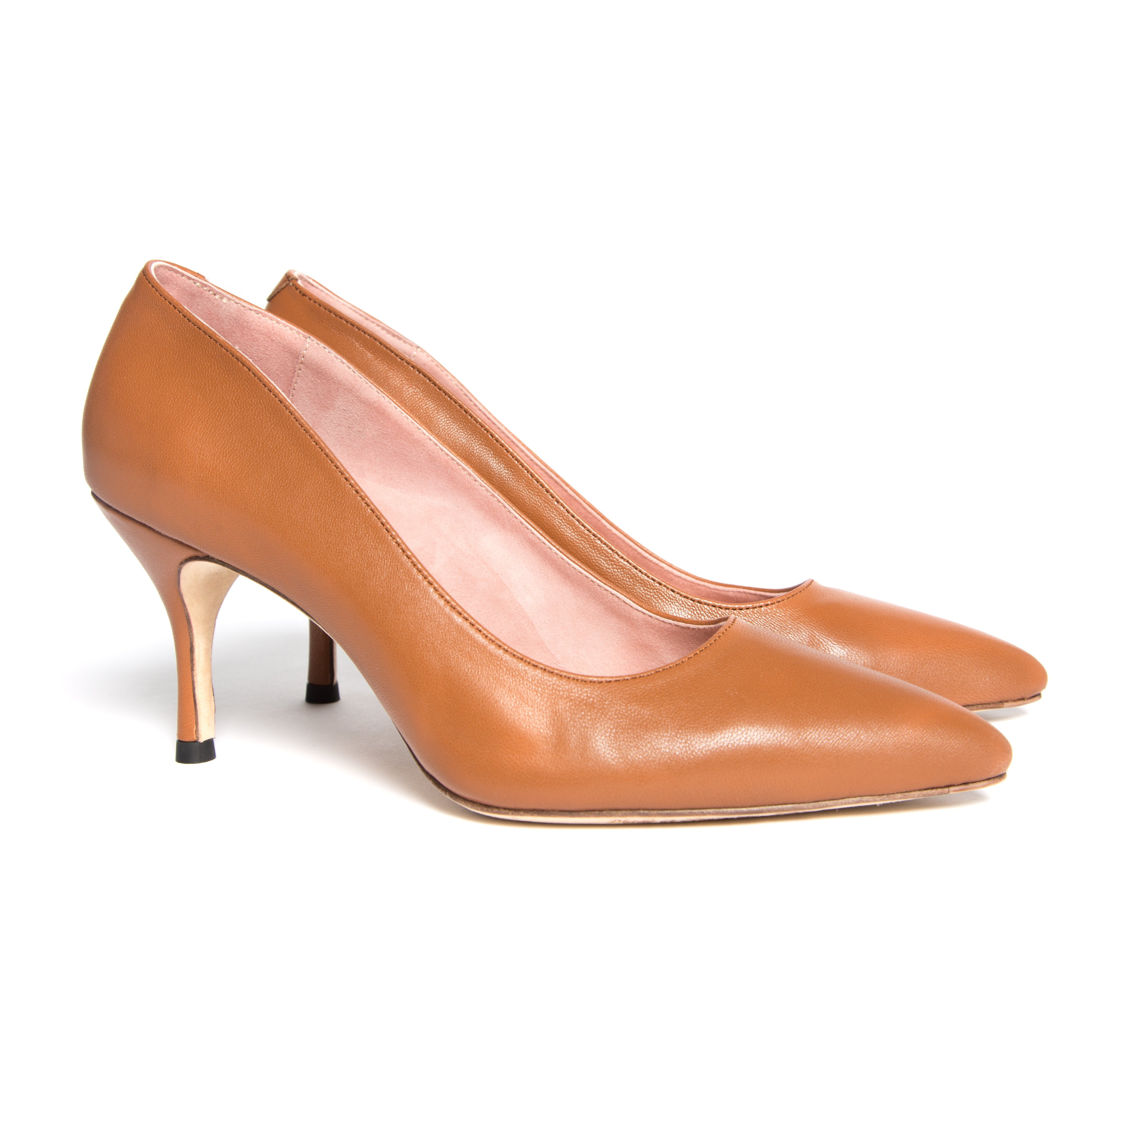 Patent leather slingback pumps in brown - Gianvito Rossi | Mytheresa